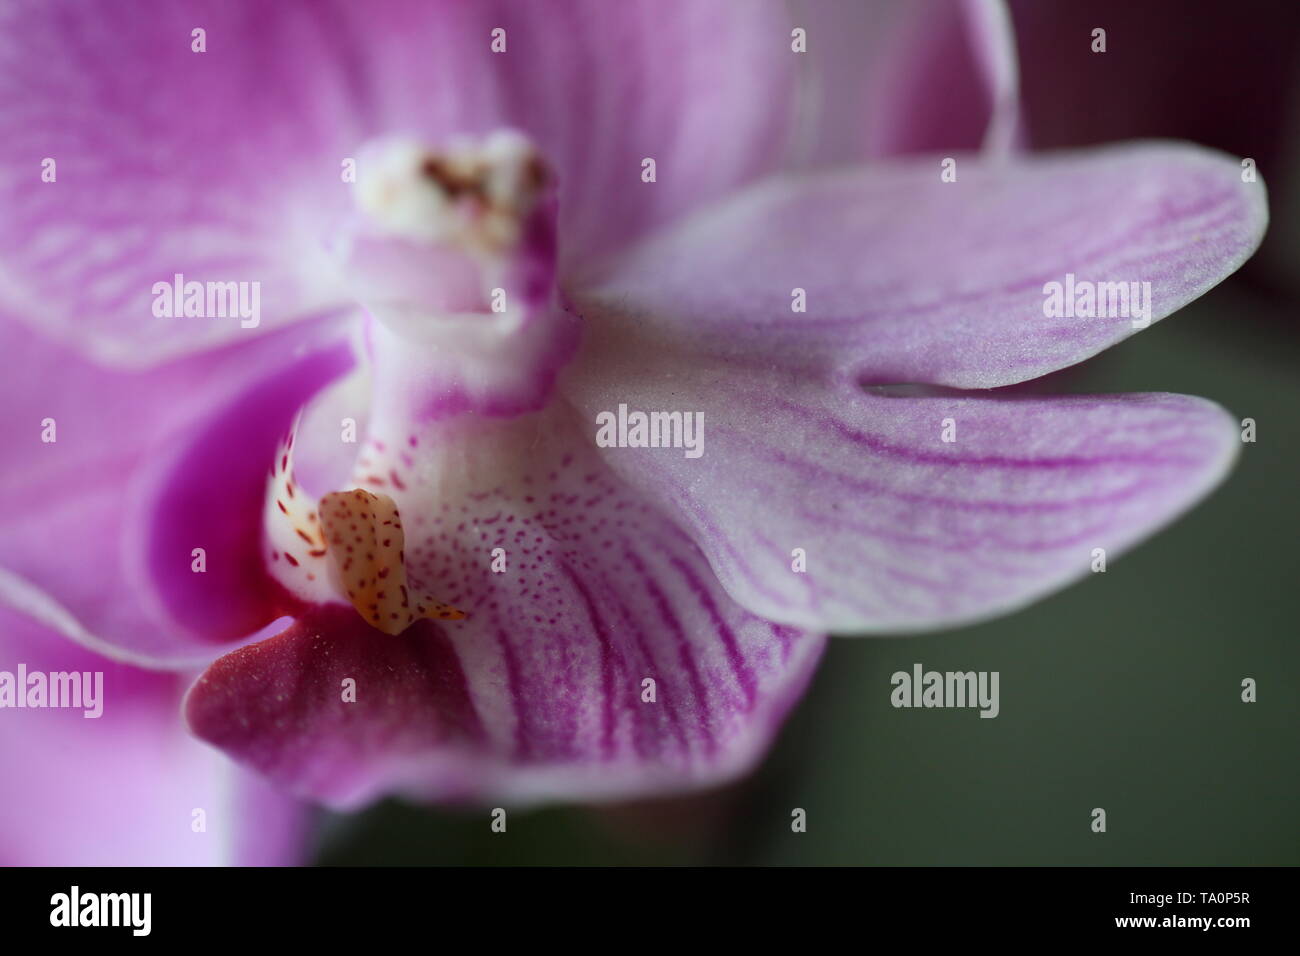 close up photo of orchid Stock Photo